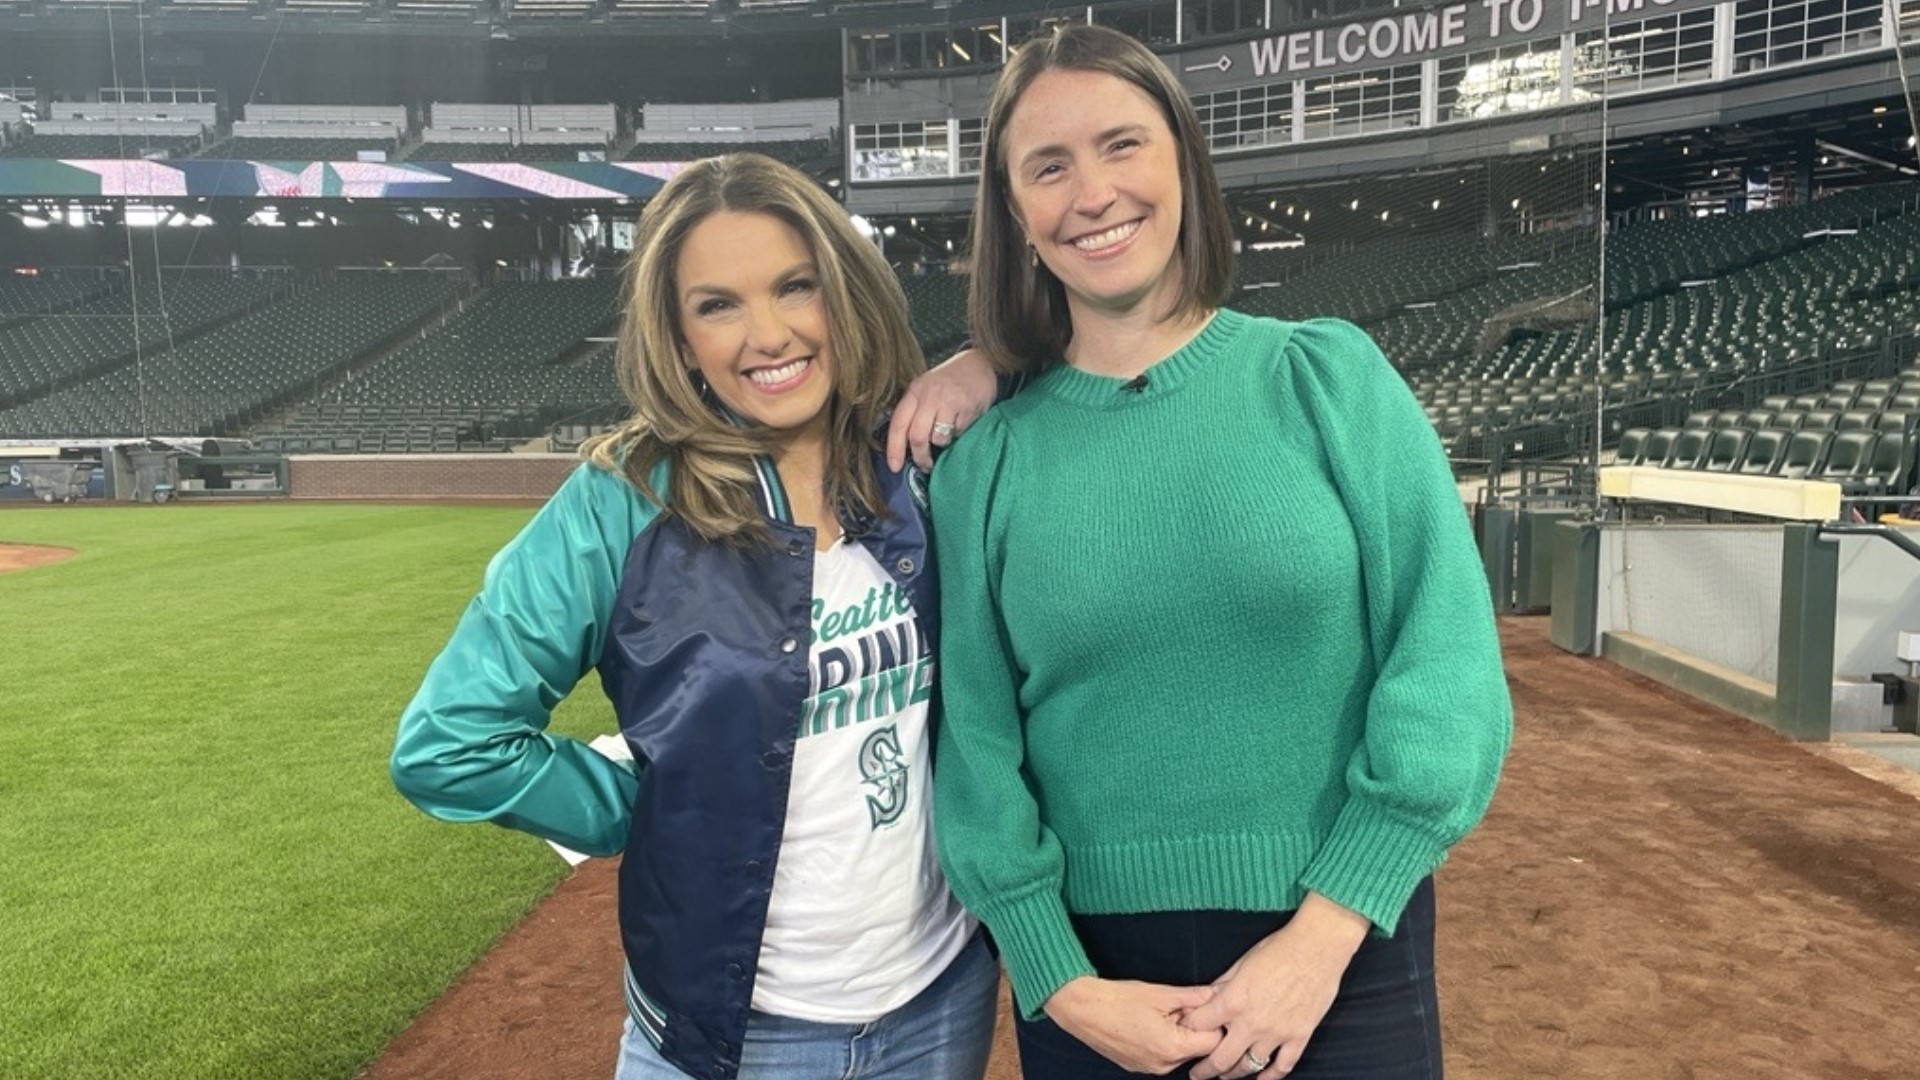 Meet Catie Griggs, Mariners’ new President of Business Operations, and the highest-ranking woman in baseball. #newdaynw